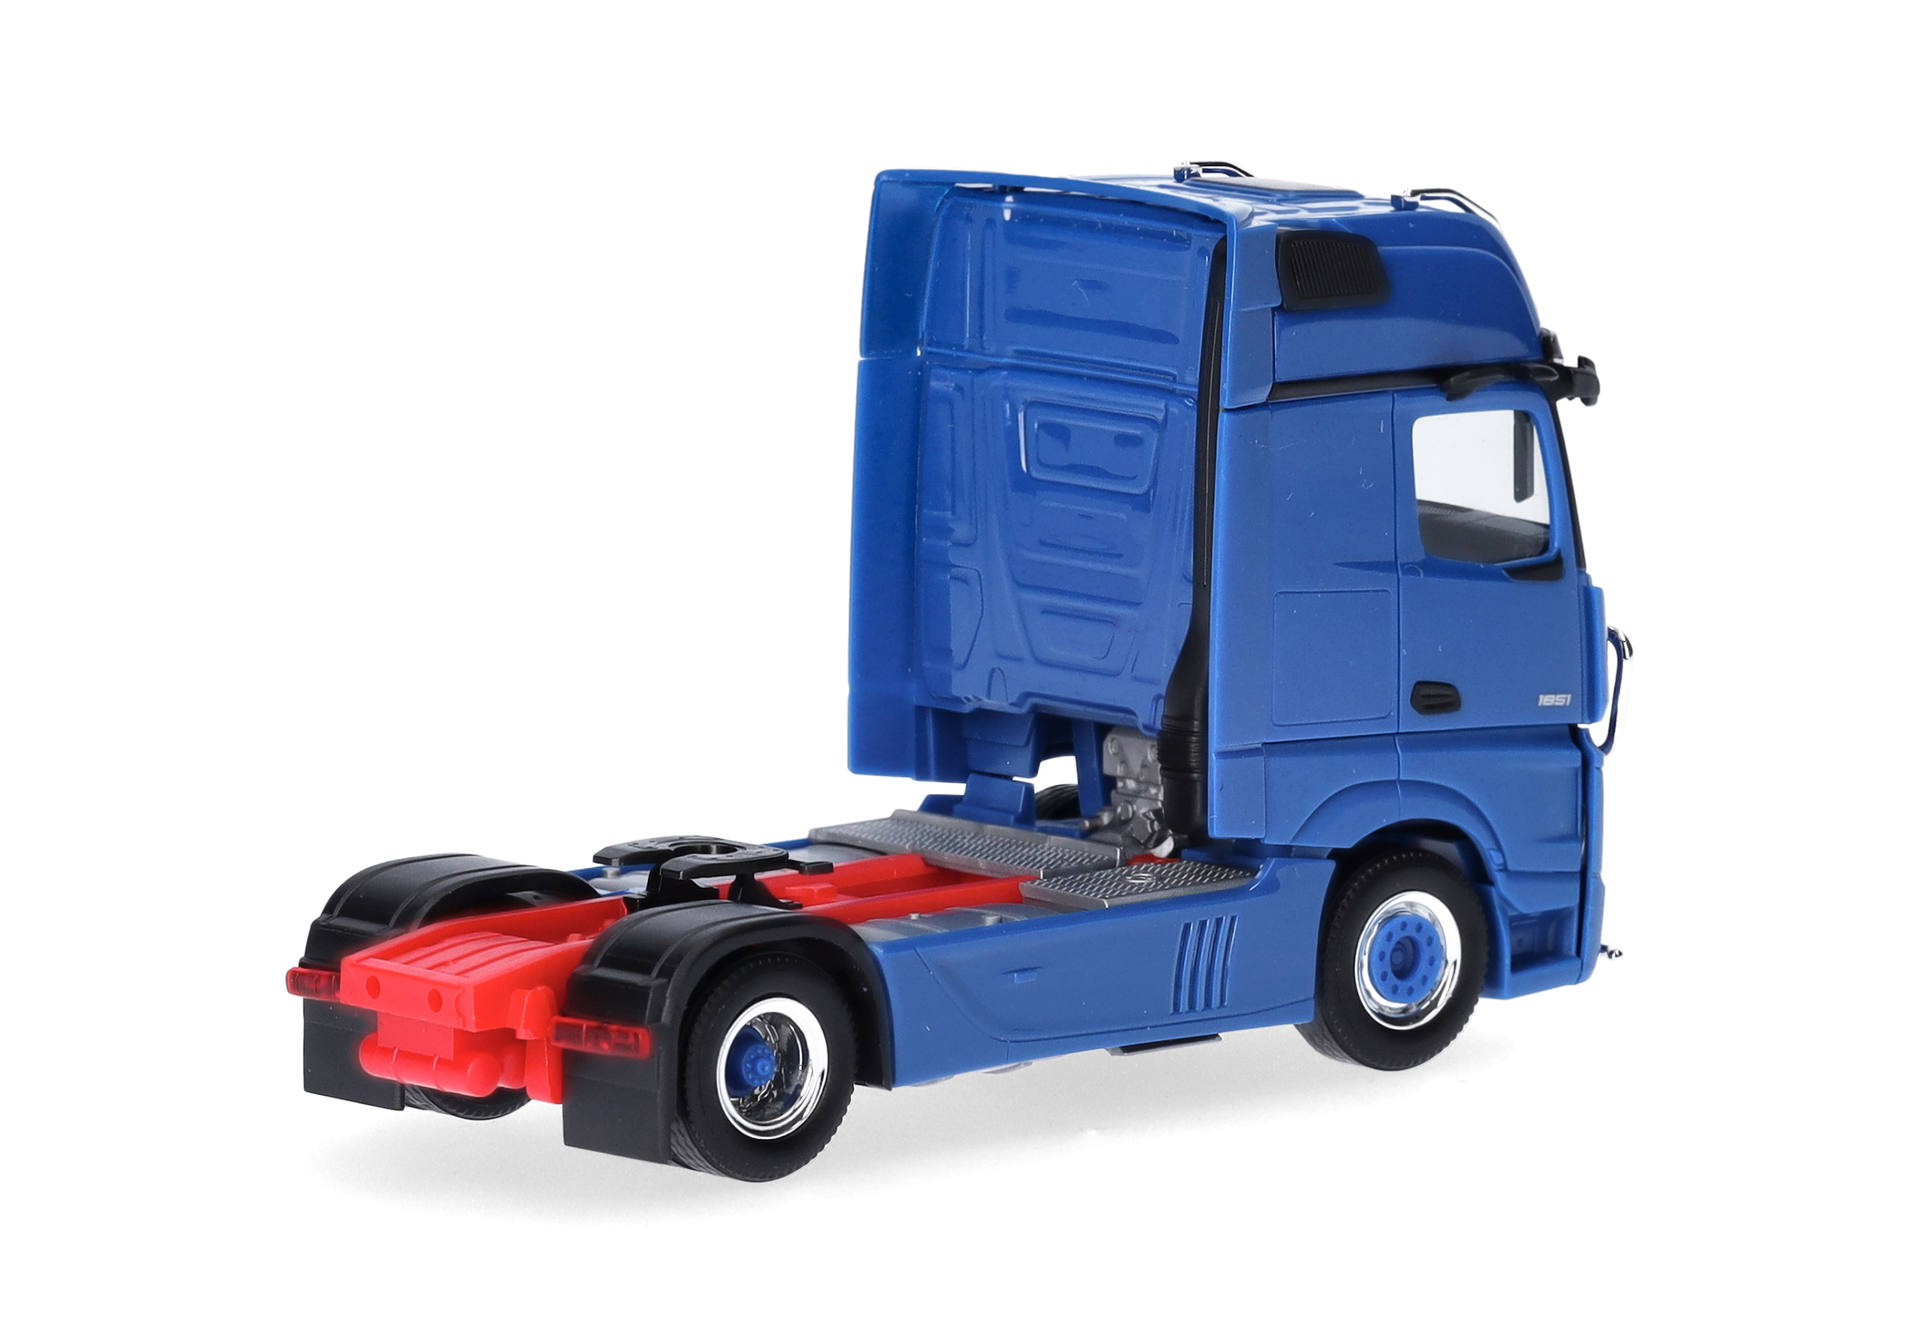 Mercedes-Benz Actros Gigaspace rigid tractor 2-axles with light bar and ram protection, gentian blue